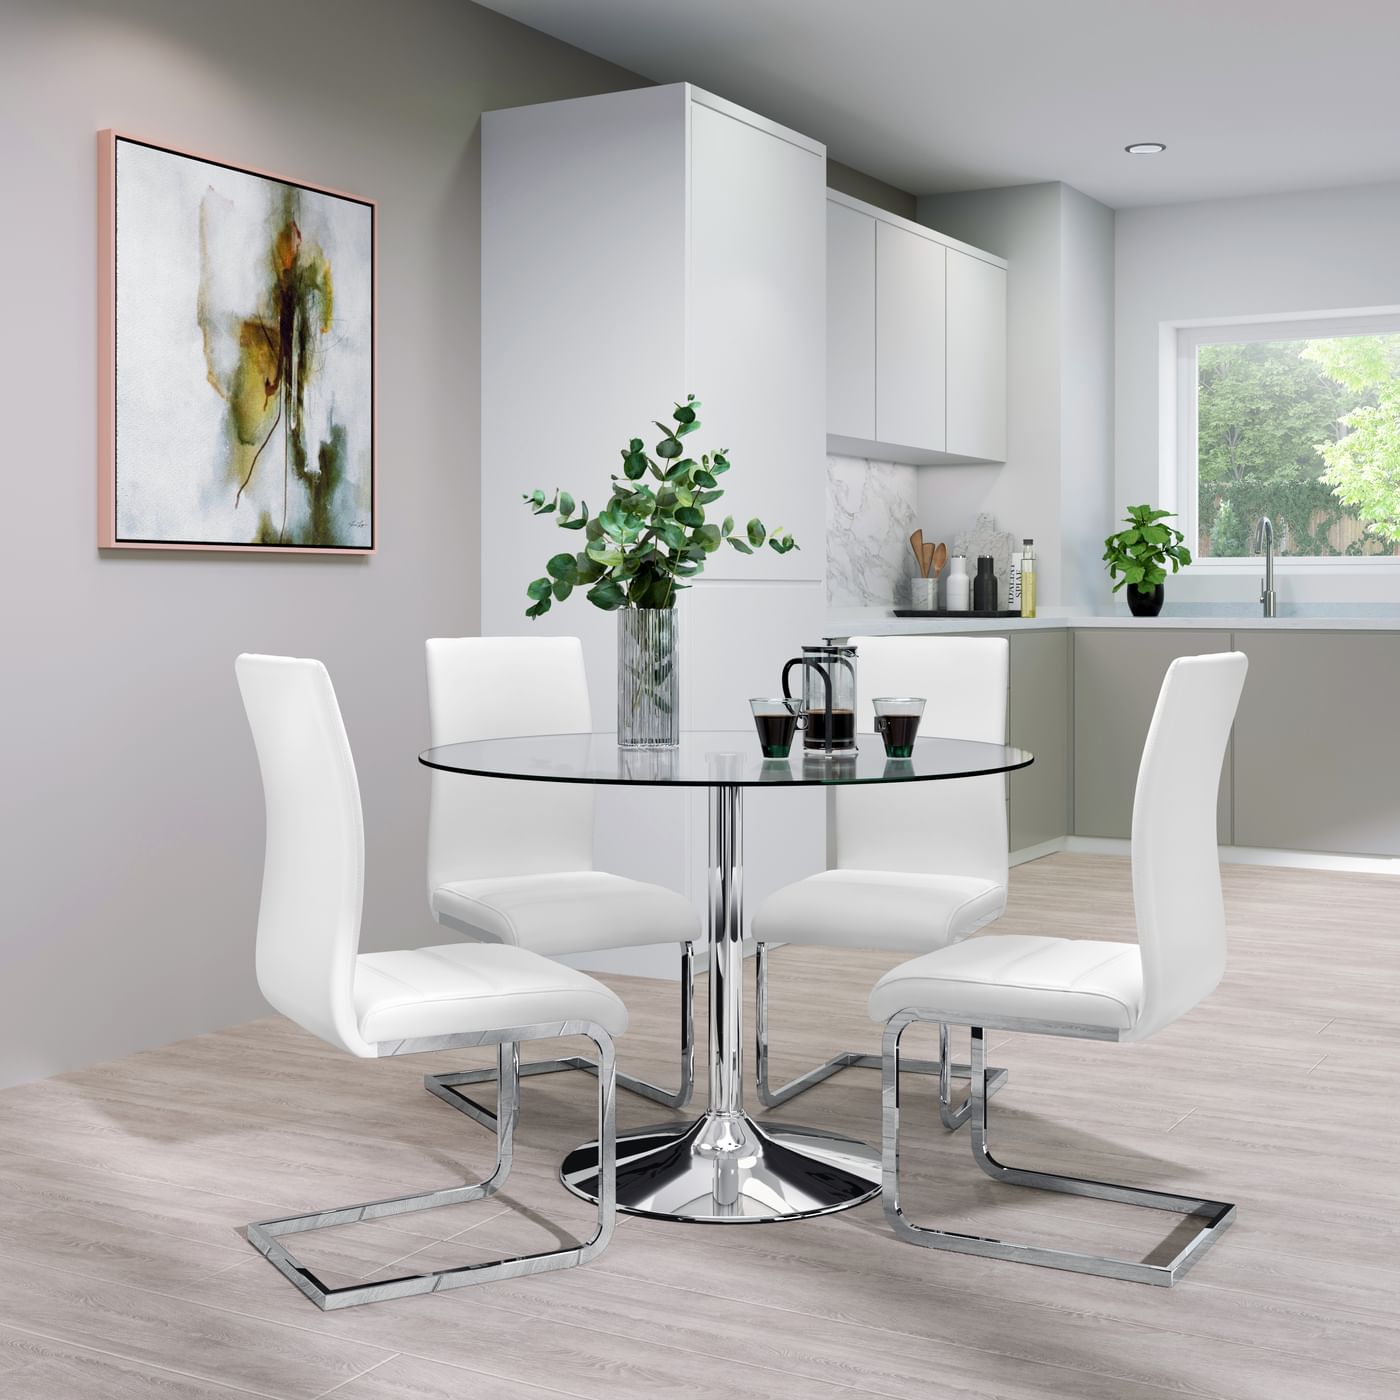 Orbit Round Chrome and Glass Dining Table with 4 Perth White Leather